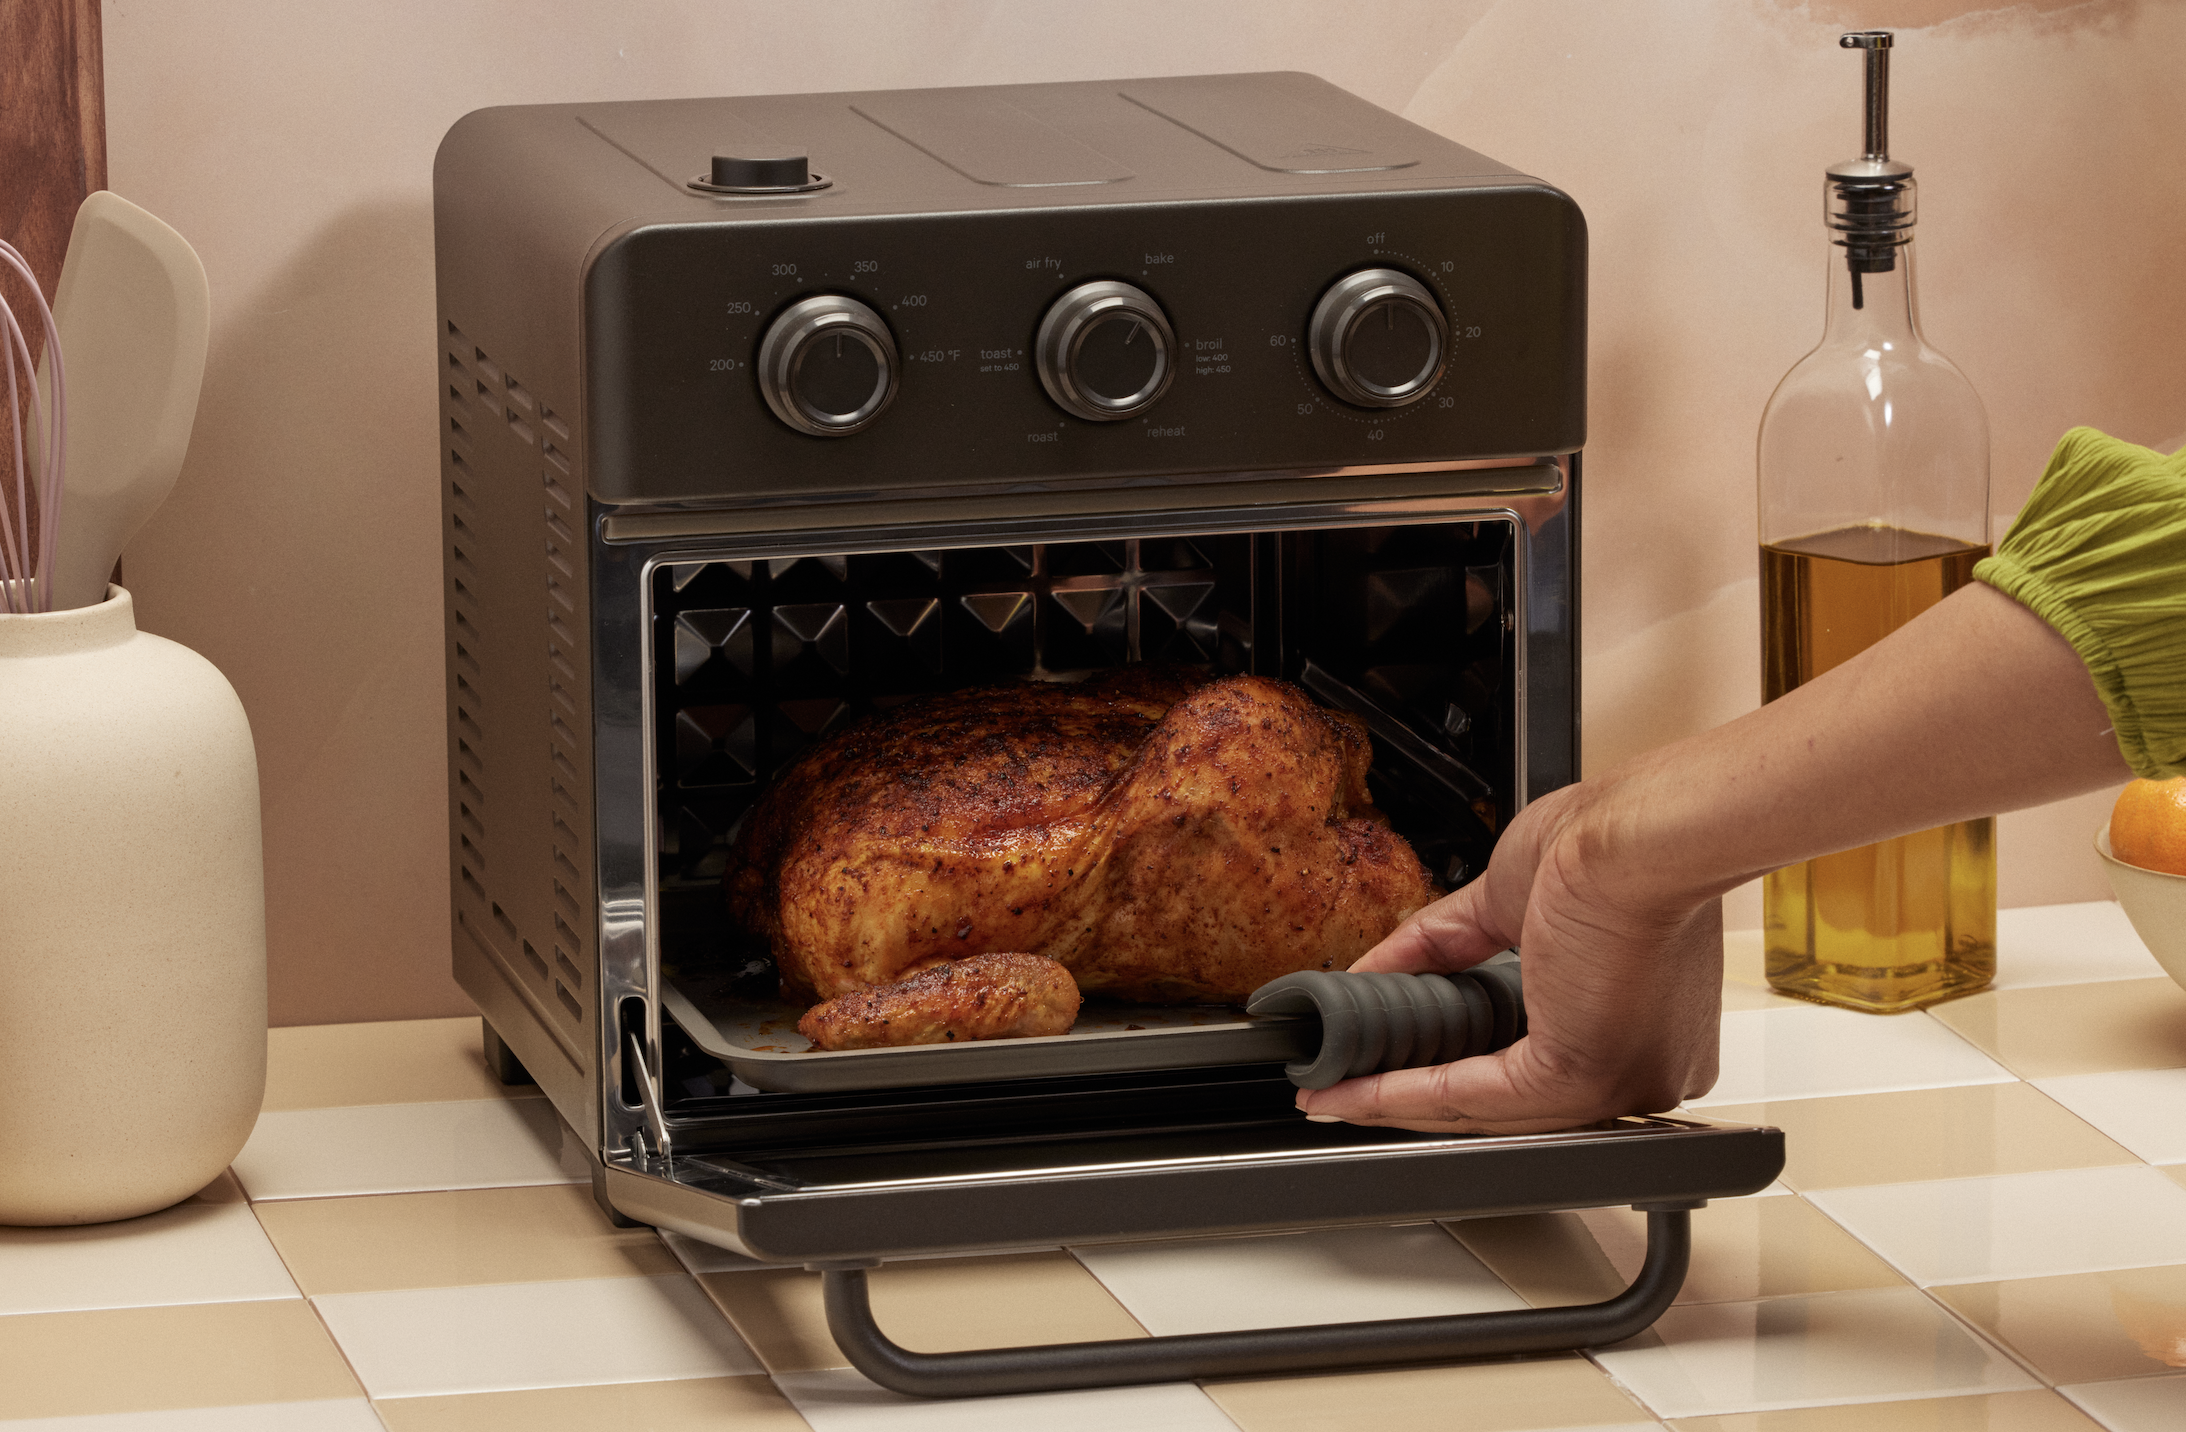 Our Place Just Launched Its First Ever Appliance, and All We Can Say is Whoa